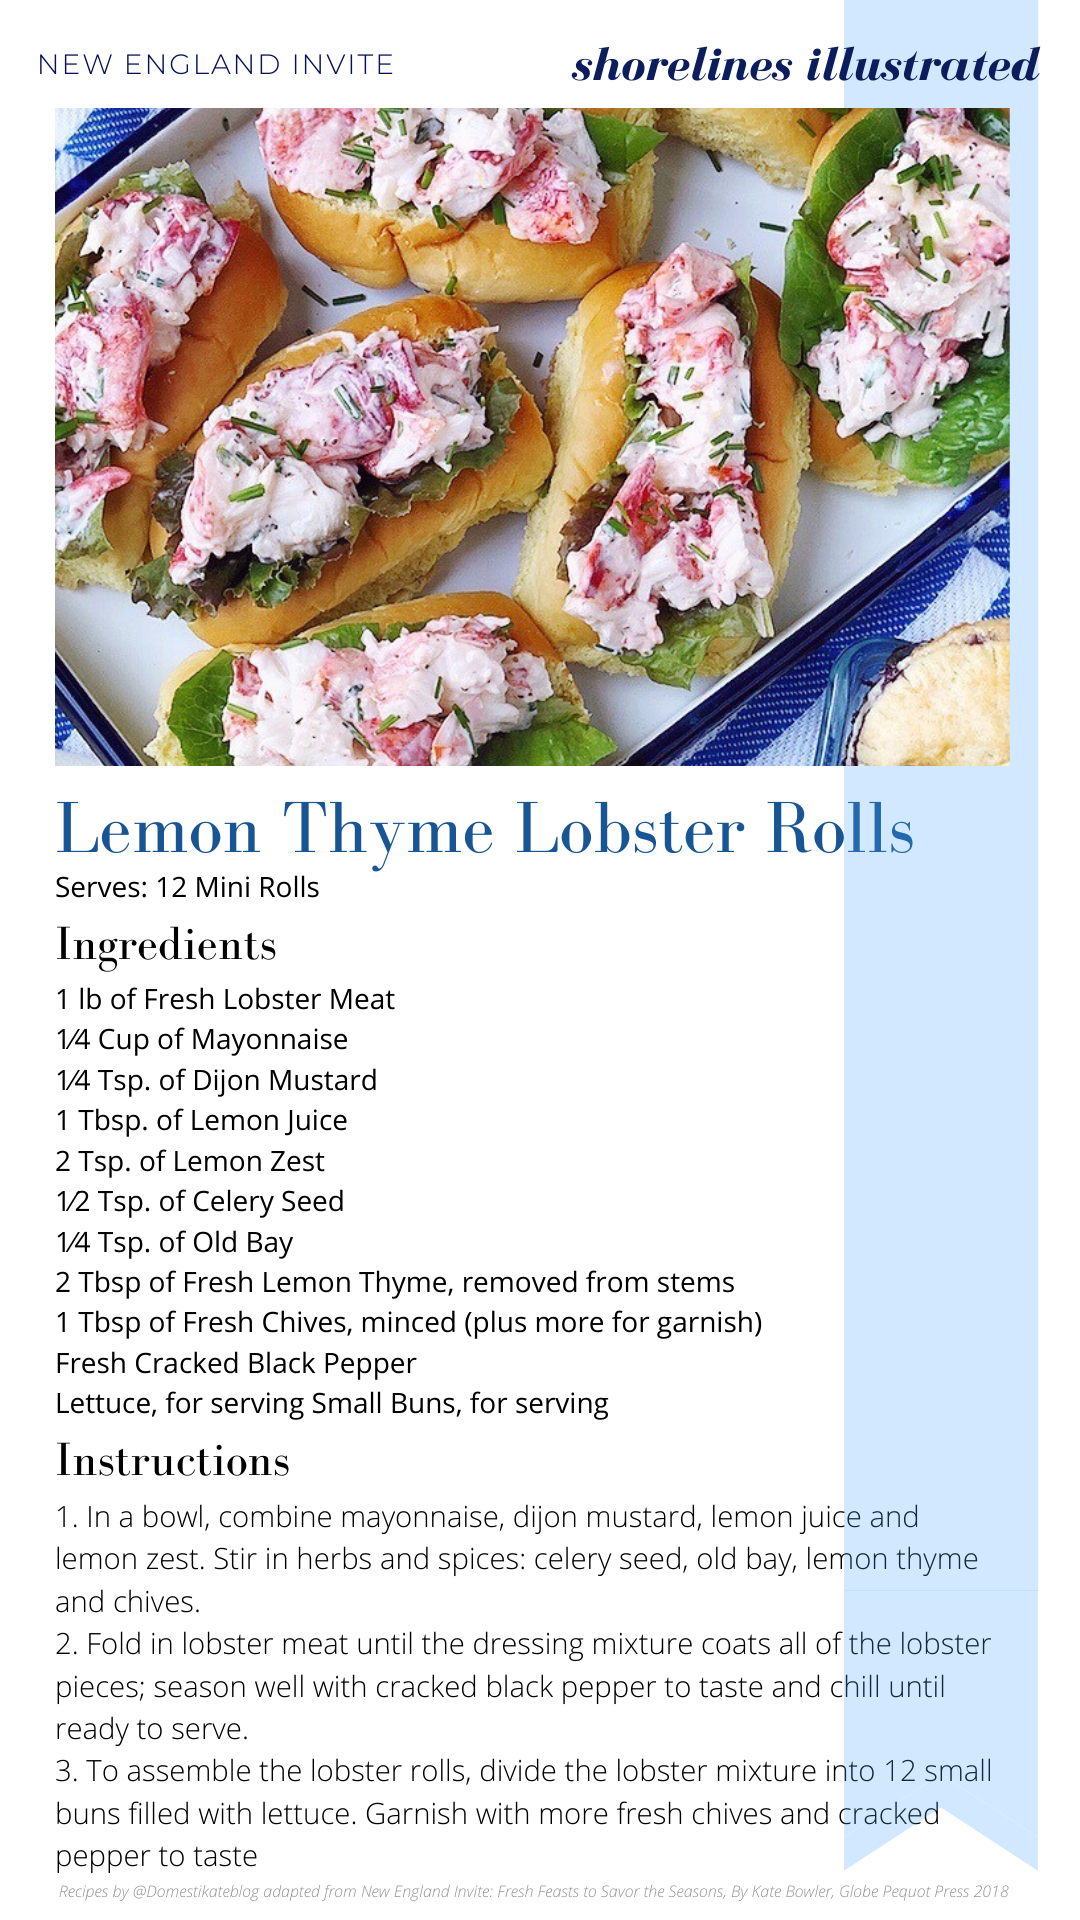 Classic_Summertime_Lunch_Menu_Lobster_Rolls_Kate_Bowler_New_England_Invite_3